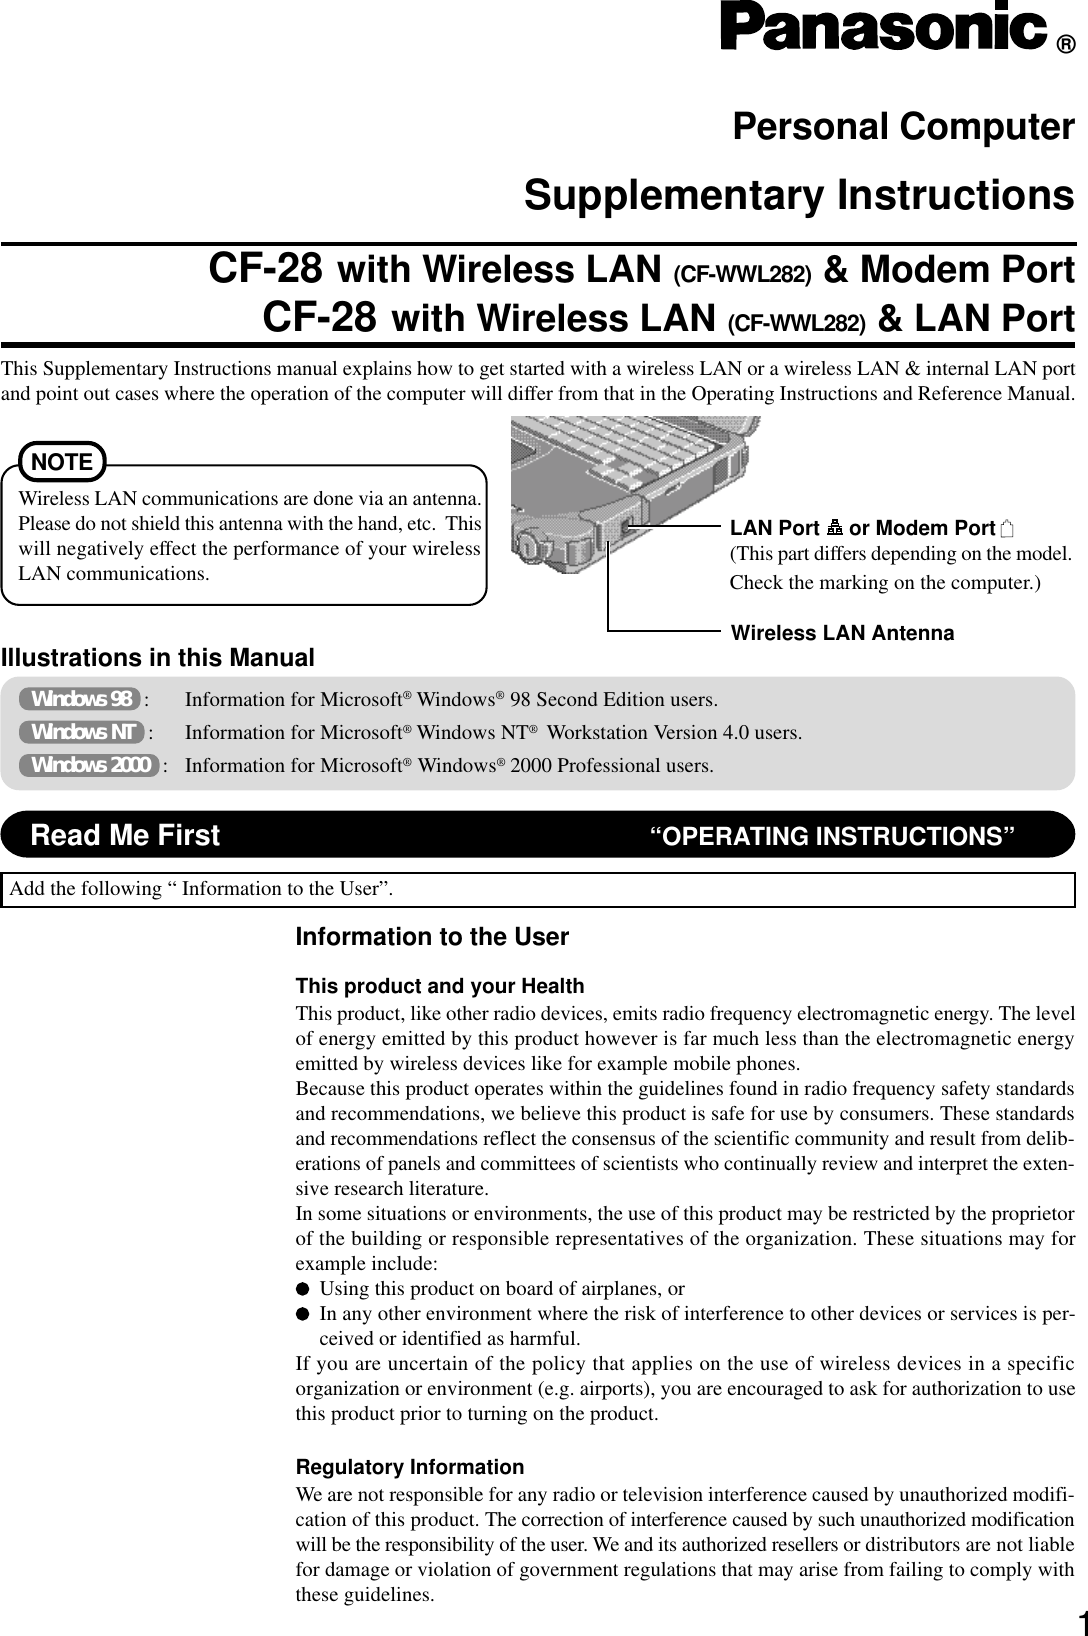 1Illustrations in this ManualPersonal ComputerSupplementary InstructionsThis Supplementary Instructions manual explains how to get started with a wireless LAN or a wireless LAN &amp; internal LAN portand point out cases where the operation of the computer will differ from that in the Operating Instructions and Reference Manual. Windows 98   : Information for Microsoft® Windows® 98 Second Edition users. Windows NT   : Information for Microsoft® Windows NT®  Workstation Version 4.0 users. Windows 2000   : Information for Microsoft® Windows® 2000 Professional users.Add the following “ Information to the User”.Information to the UserThis product and your HealthThis product, like other radio devices, emits radio frequency electromagnetic energy. The levelof energy emitted by this product however is far much less than the electromagnetic energyemitted by wireless devices like for example mobile phones.Because this product operates within the guidelines found in radio frequency safety standardsand recommendations, we believe this product is safe for use by consumers. These standardsand recommendations reflect the consensus of the scientific community and result from delib-erations of panels and committees of scientists who continually review and interpret the exten-sive research literature.In some situations or environments, the use of this product may be restricted by the proprietorof the building or responsible representatives of the organization. These situations may forexample include:Using this product on board of airplanes, orIn any other environment where the risk of interference to other devices or services is per-ceived or identified as harmful.If you are uncertain of the policy that applies on the use of wireless devices in a specificorganization or environment (e.g. airports), you are encouraged to ask for authorization to usethis product prior to turning on the product.Regulatory InformationWe are not responsible for any radio or television interference caused by unauthorized modifi-cation of this product. The correction of interference caused by such unauthorized modificationwill be the responsibility of the user. We and its authorized resellers or distributors are not liablefor damage or violation of government regulations that may arise from failing to comply withthese guidelines.®Read Me First “OPERATING INSTRUCTIONS”Wireless LAN AntennaNOTEWireless LAN communications are done via an antenna.Please do not shield this antenna with the hand, etc.  Thiswill negatively effect the performance of your wirelessLAN communications.LAN Port   or Modem Port (This part differs depending on the model.Check the marking on the computer.)CF-28 with Wireless LAN (CF-WWL282) &amp; Modem PortCF-28 with Wireless LAN (CF-WWL282) &amp; LAN Port